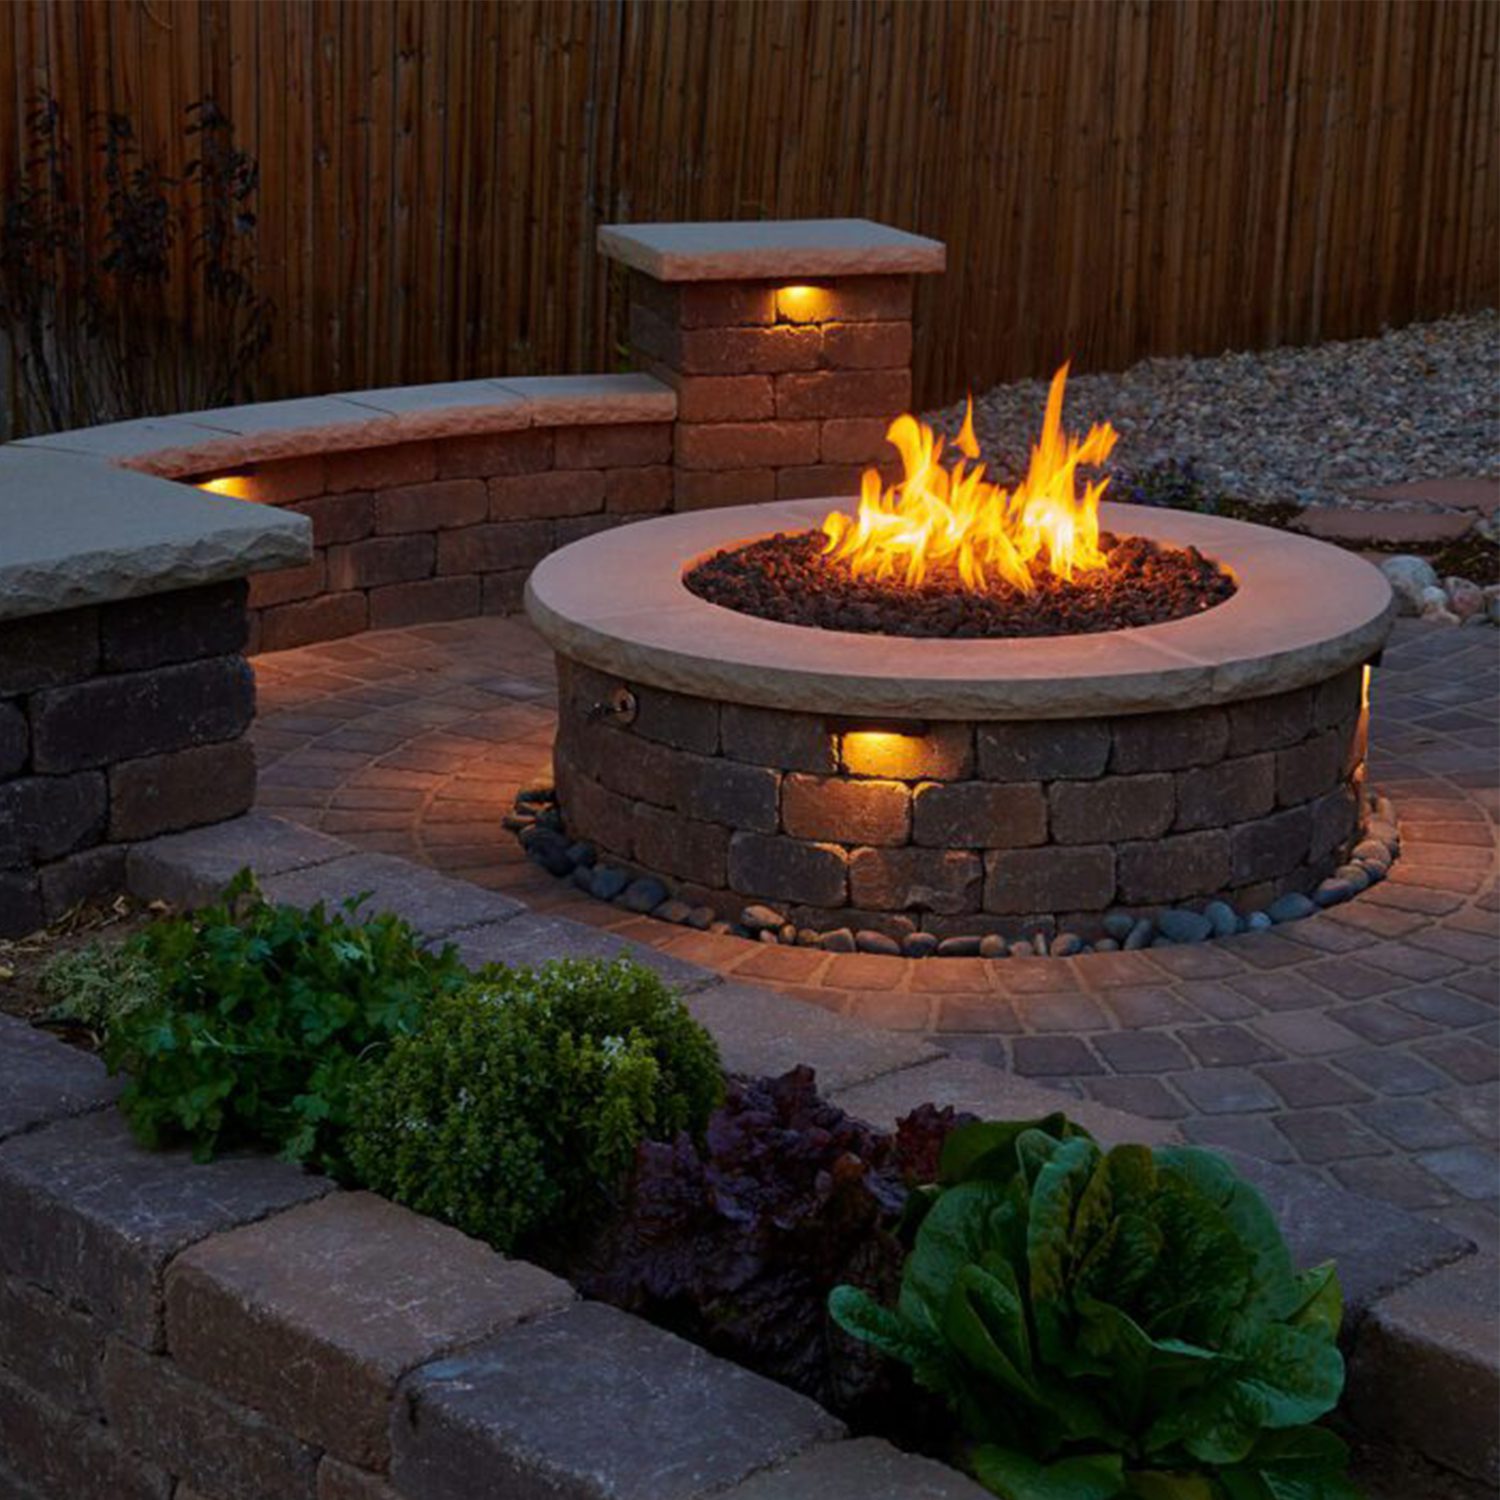 Fire pit and patio in Greenwood Village, CO